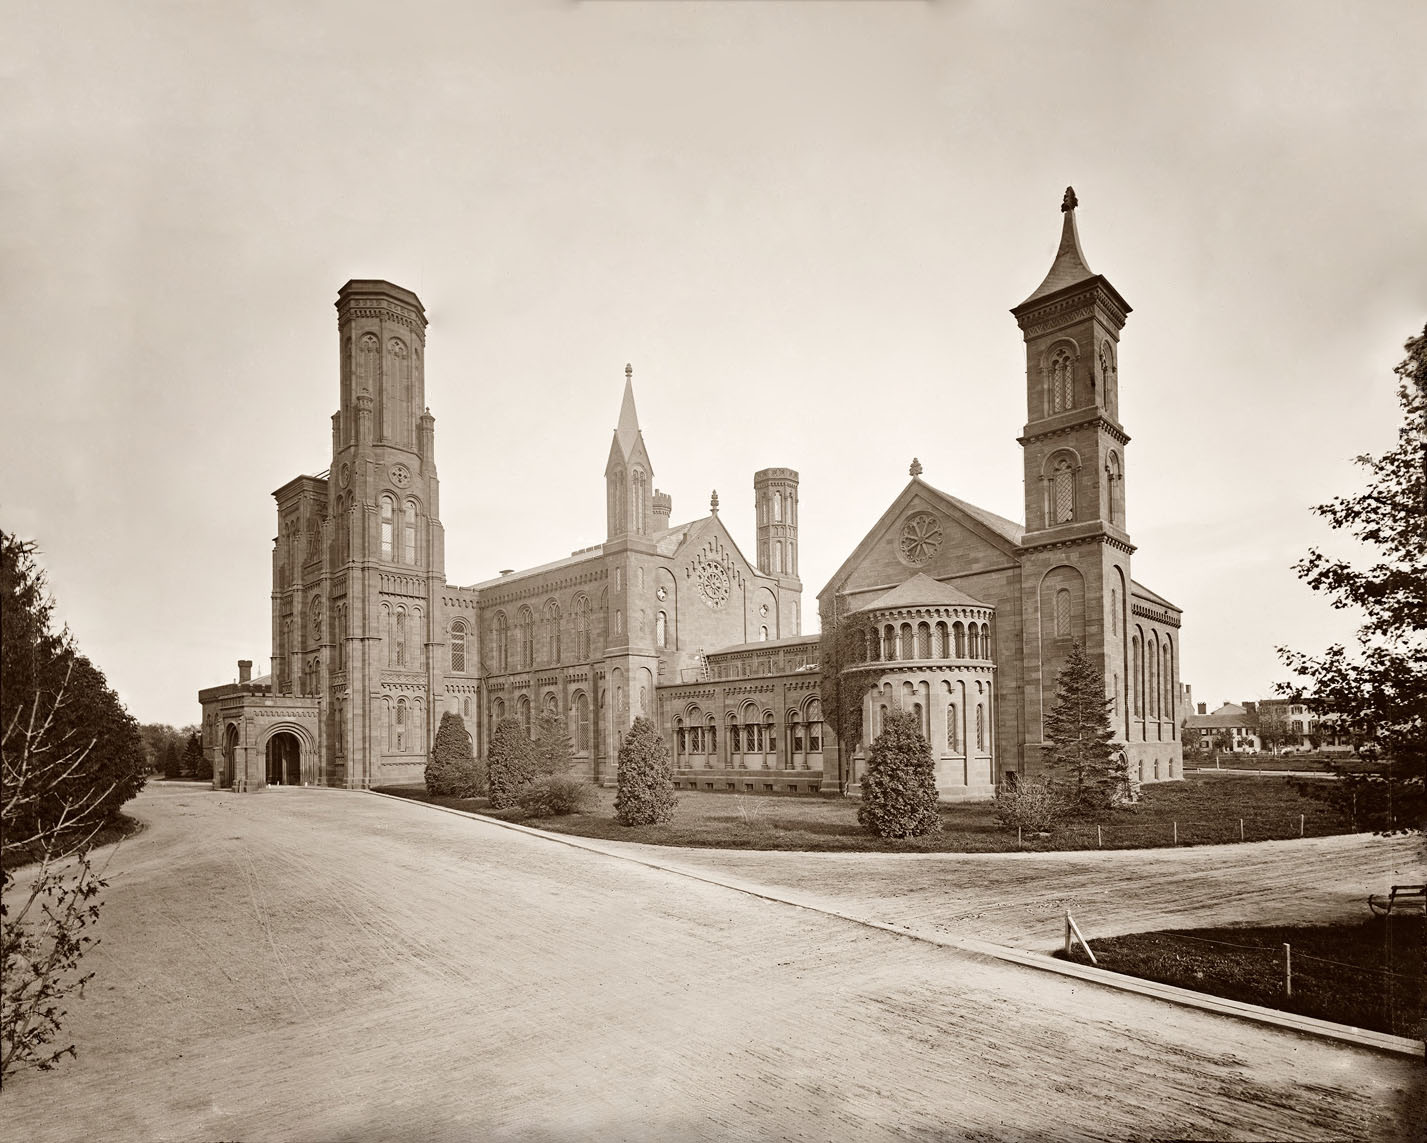 Restored Smithsonian Castle from the 1860s.

Original - Washington, D.C. "Smithsonian Institute, 1860-1865." Wet collodion glass plate, Brady-Handy Collection. Original can be found at here. View full size.